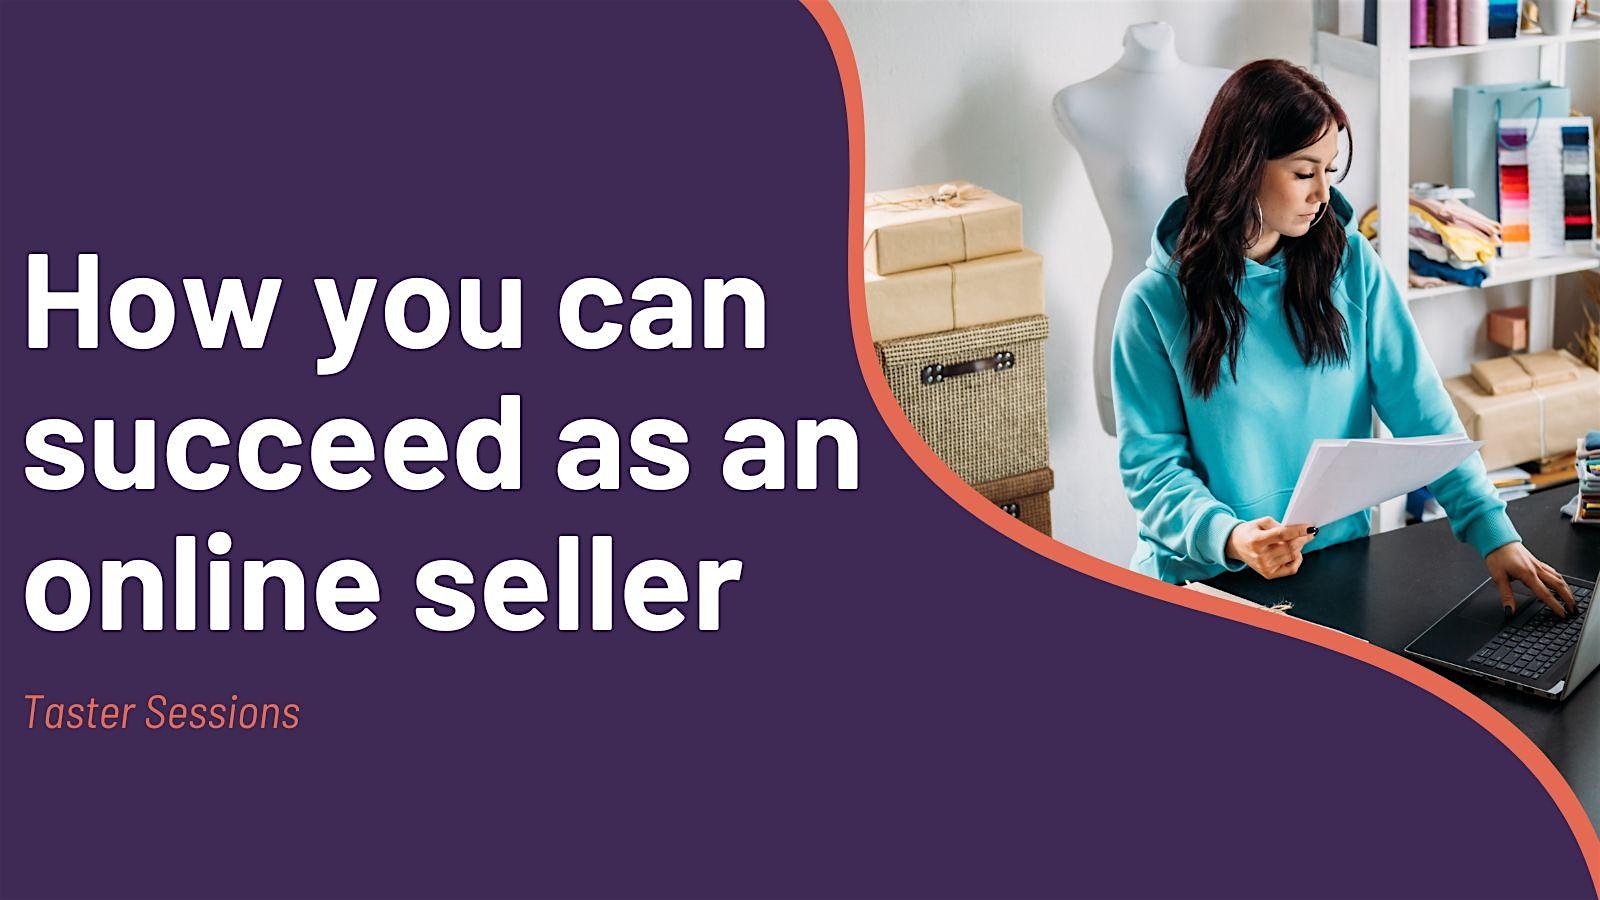 Taster Sessions: How you can succeed as an online seller (Eyemouth) image